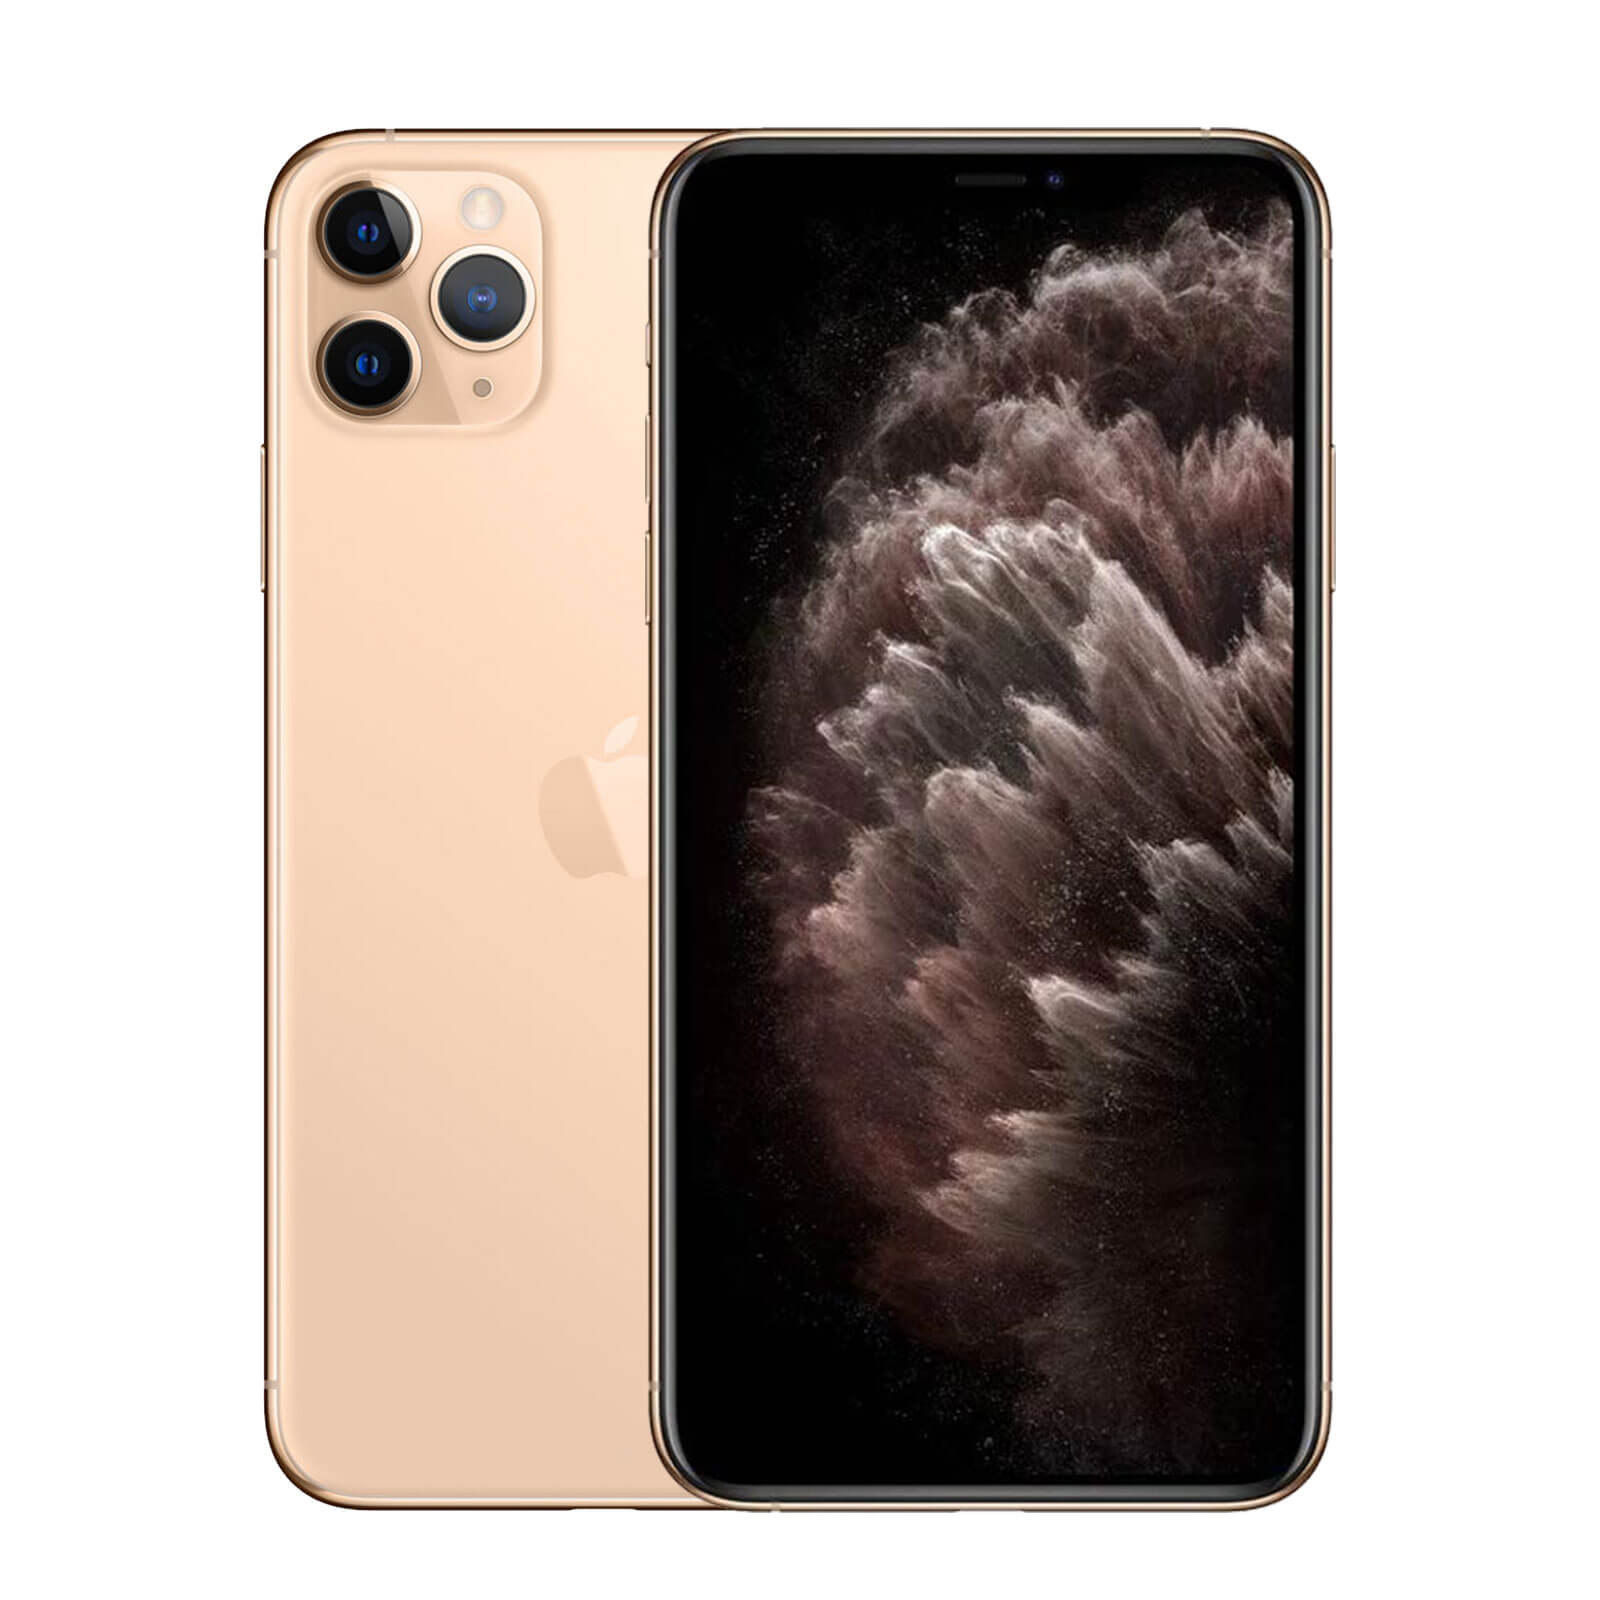 Apple iPhone 11 Pro 256GB Gold Good - T-Mobile